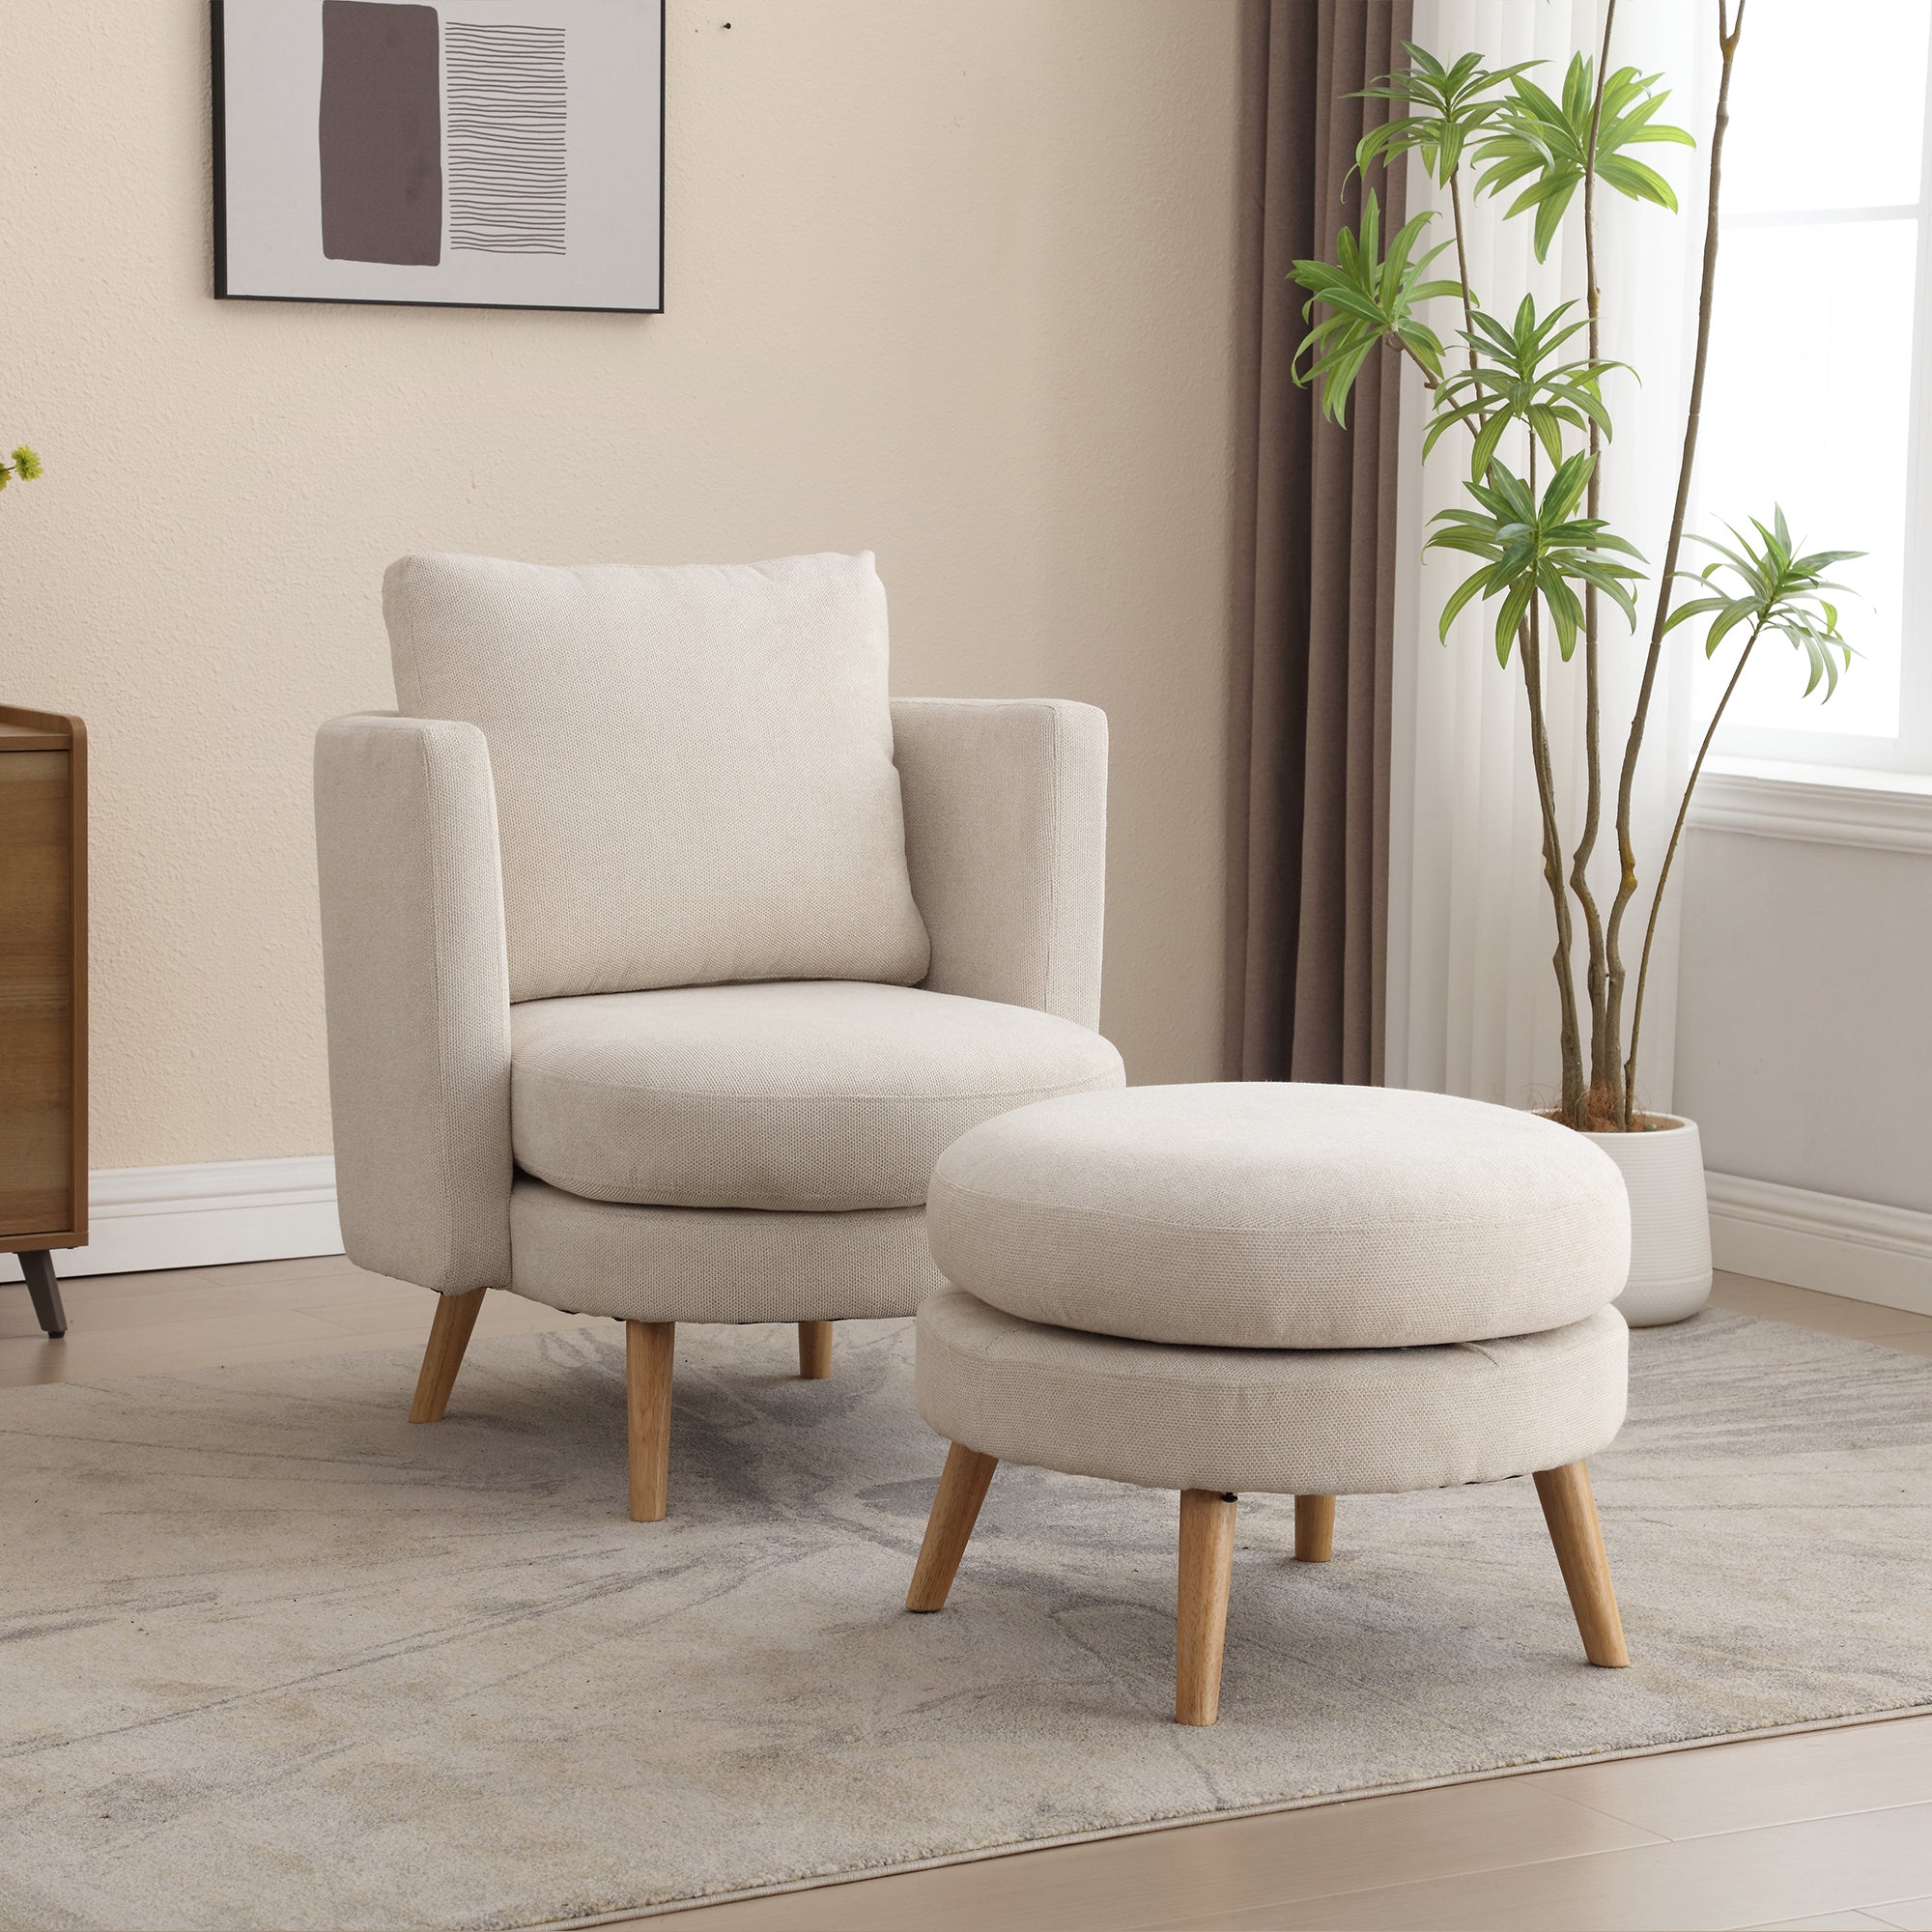 30.7" Wide Accent Chair with Ottoman Armchair